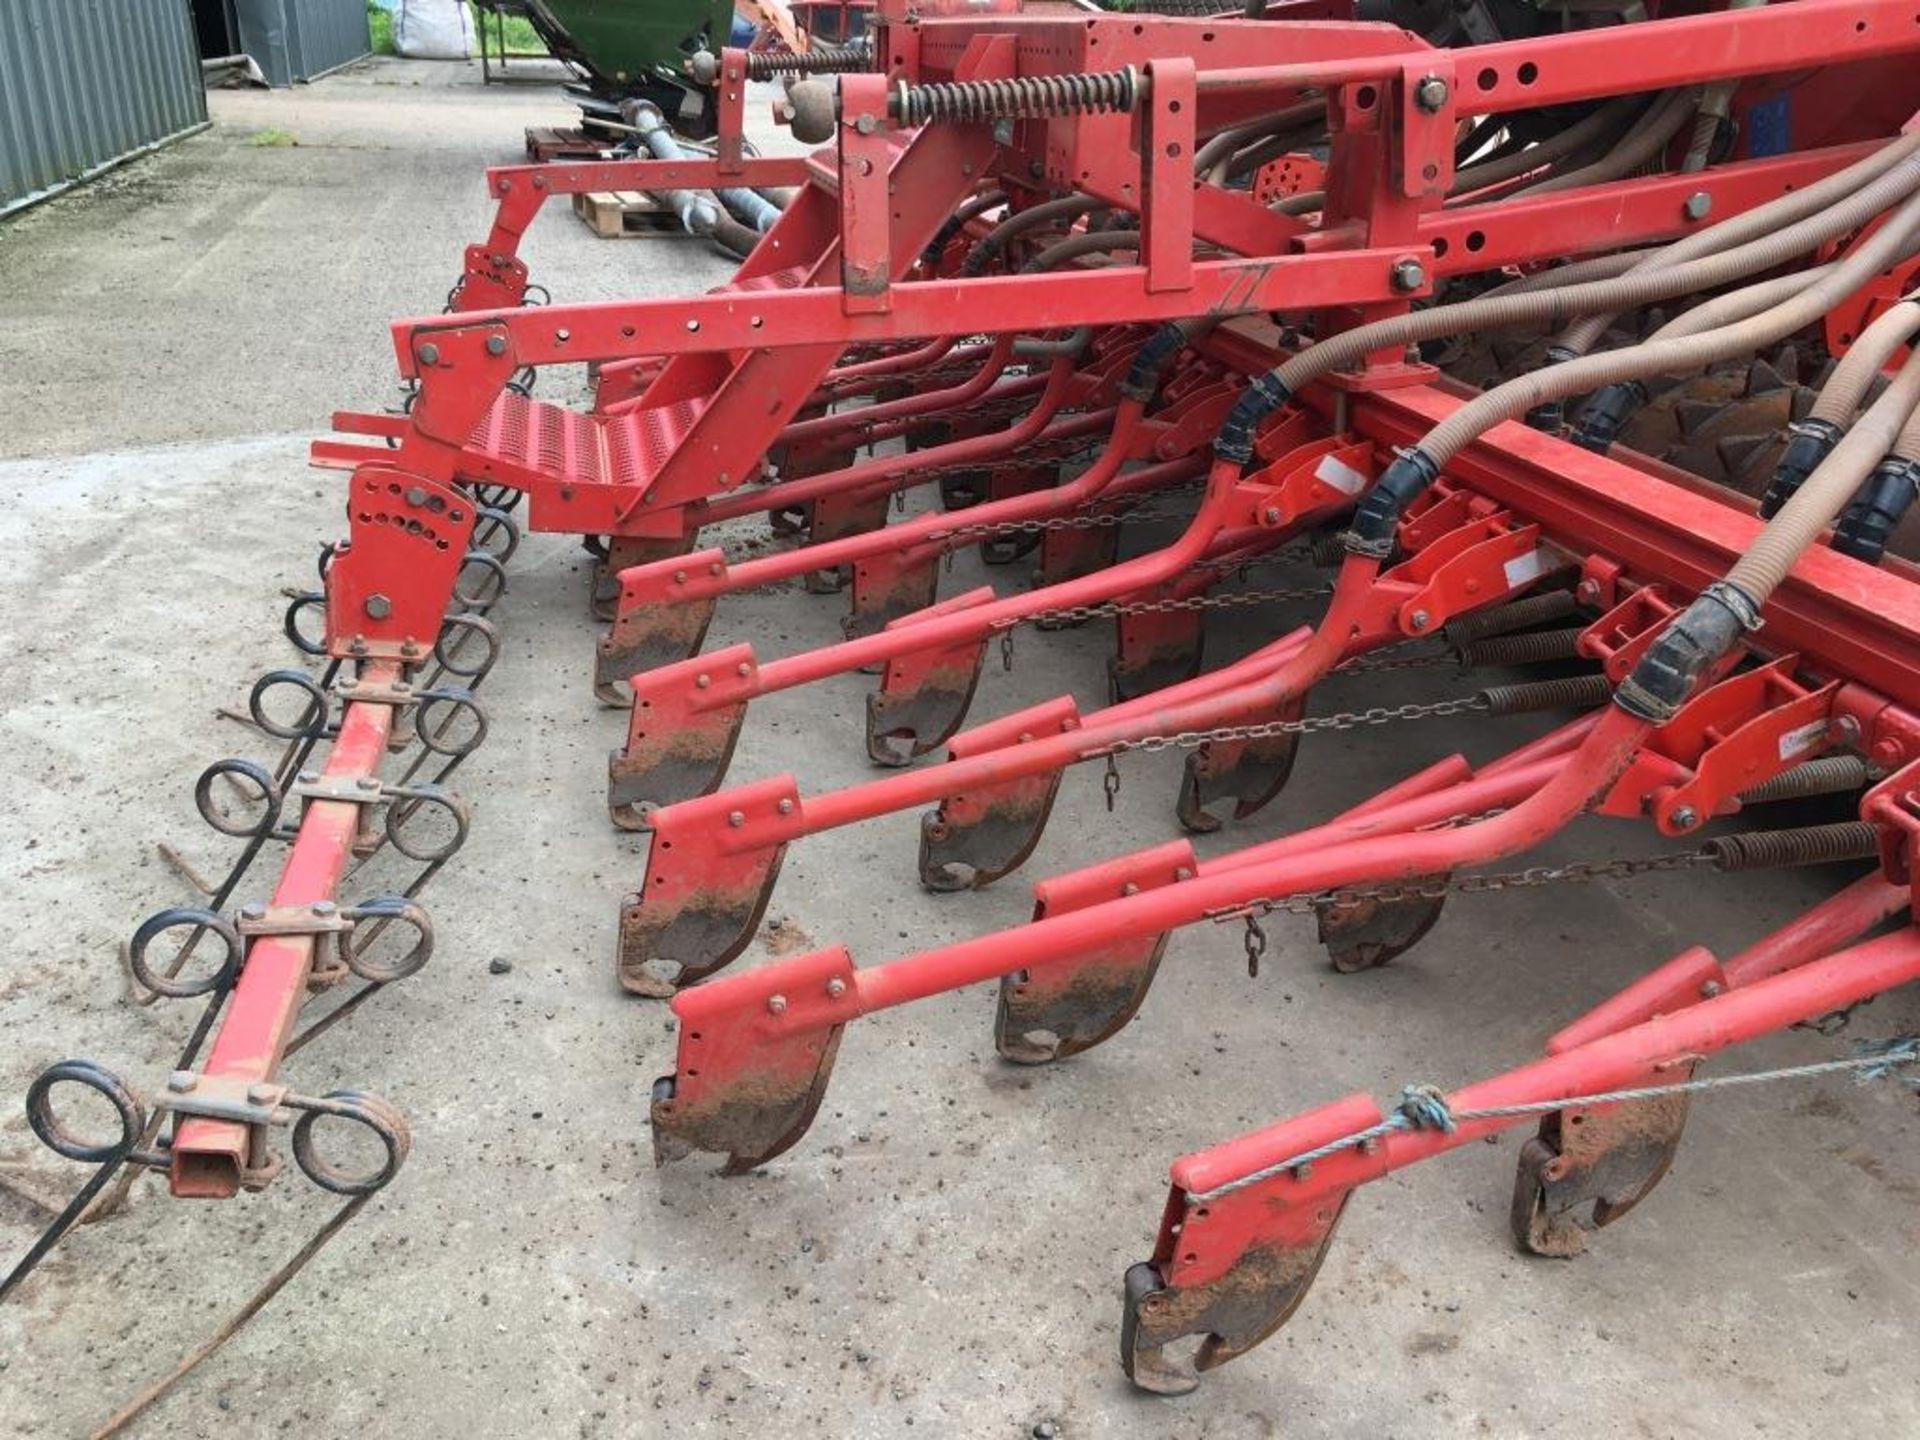 Kuhn HR 4003D 14' power harrow, serial number: A4631 (2002) with Kuhn Venta LC 402 seed drill, - Bild 9 aus 15